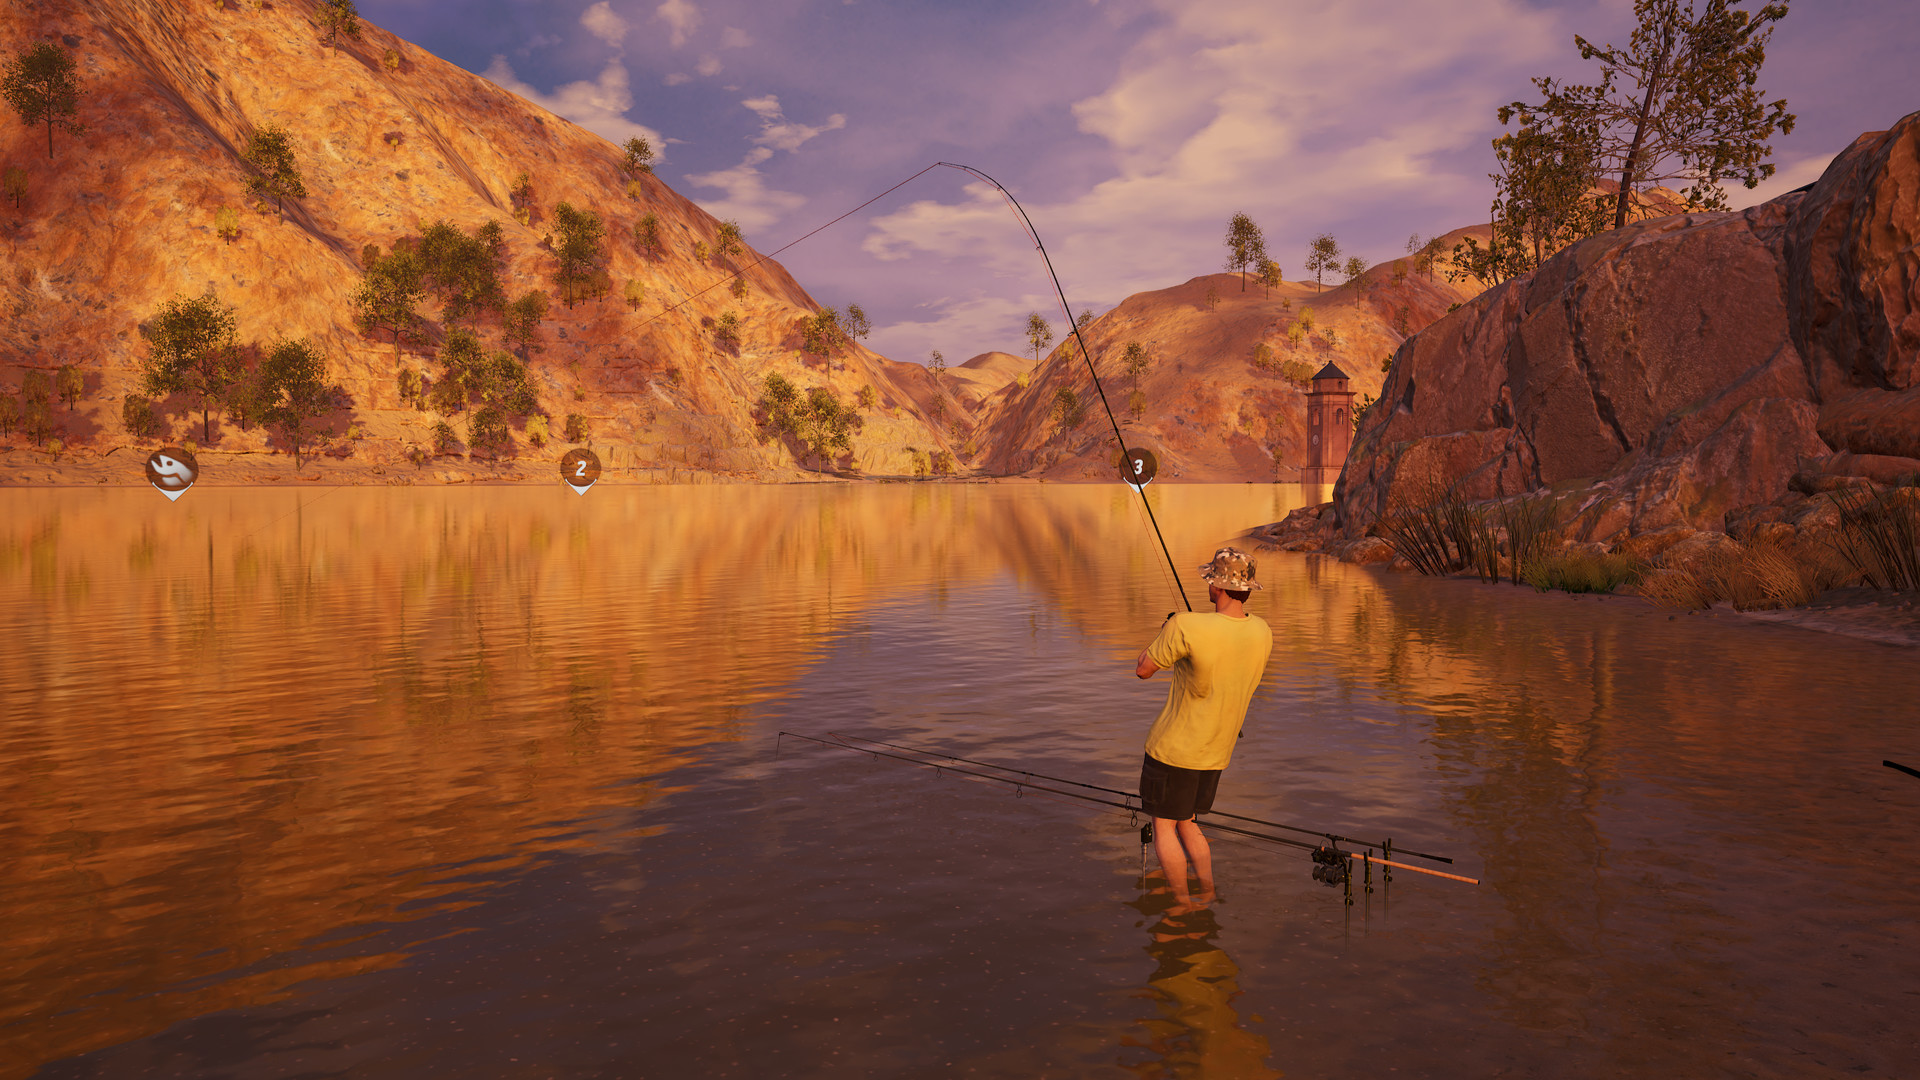 The Catch: Carp & Coarse Fishing Collector's Edition Steam CD Key